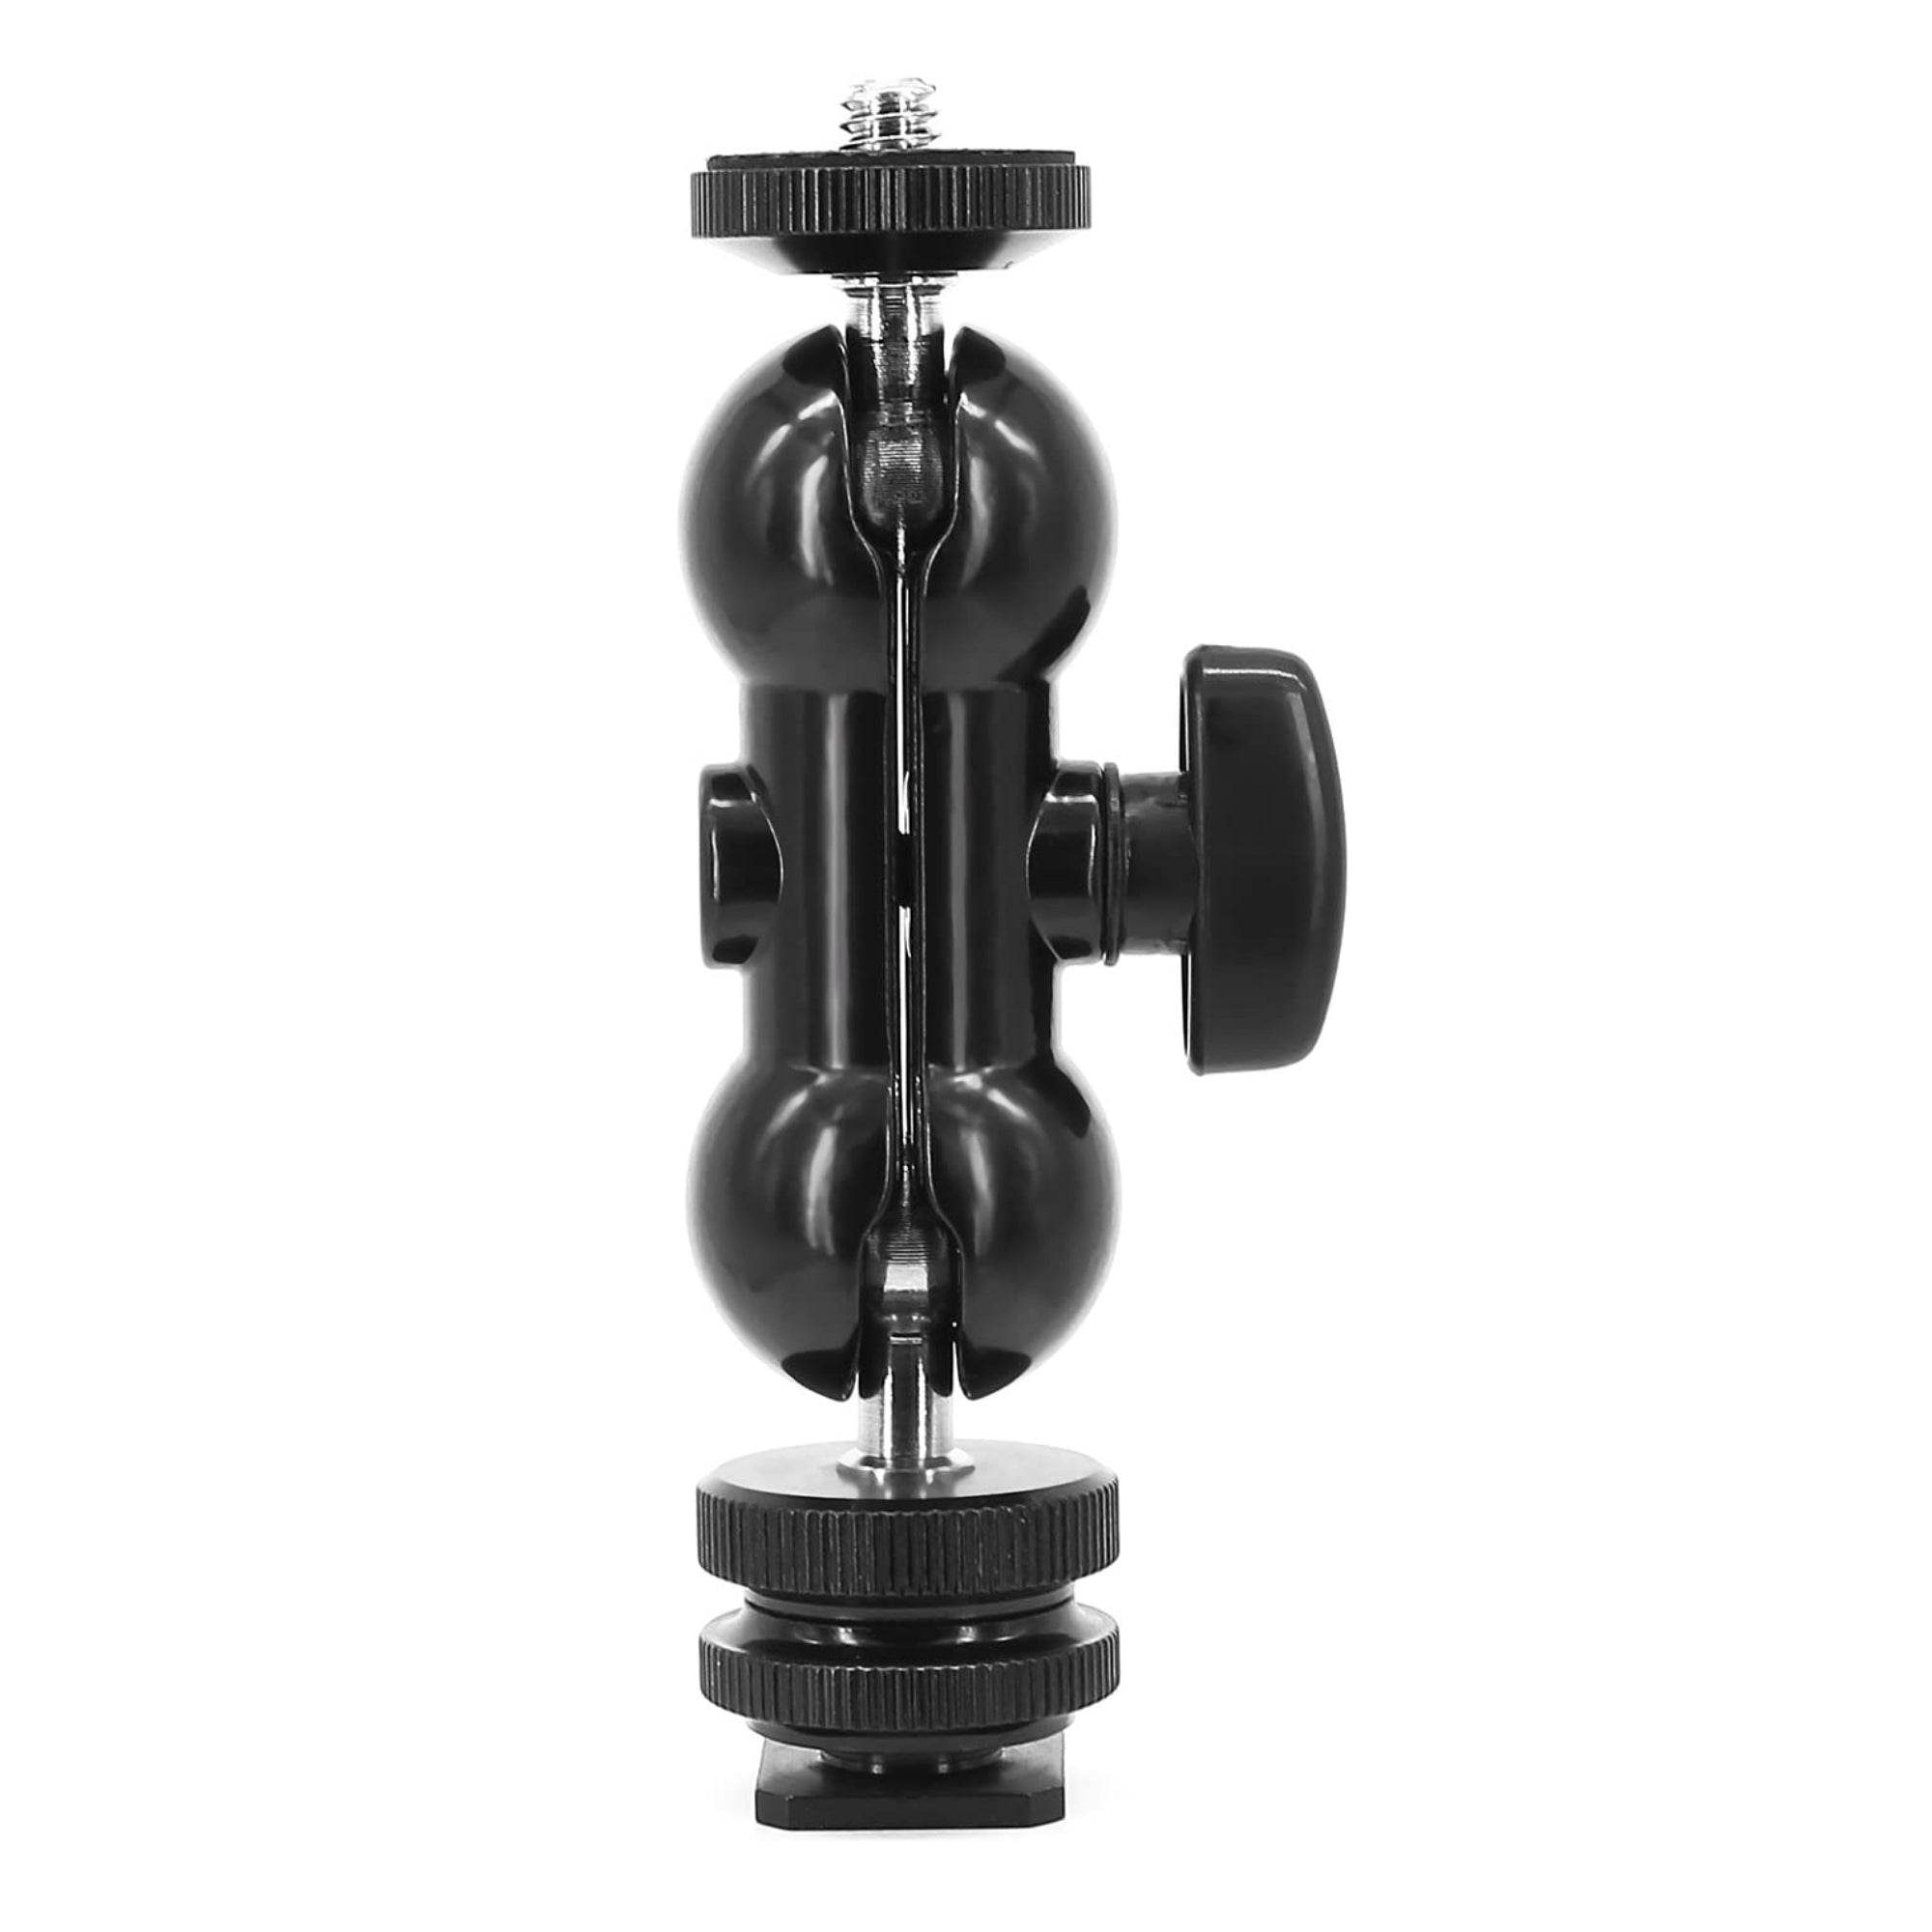 Multi-Function Double Ball head with Shoe Mount & 1/4" Screw